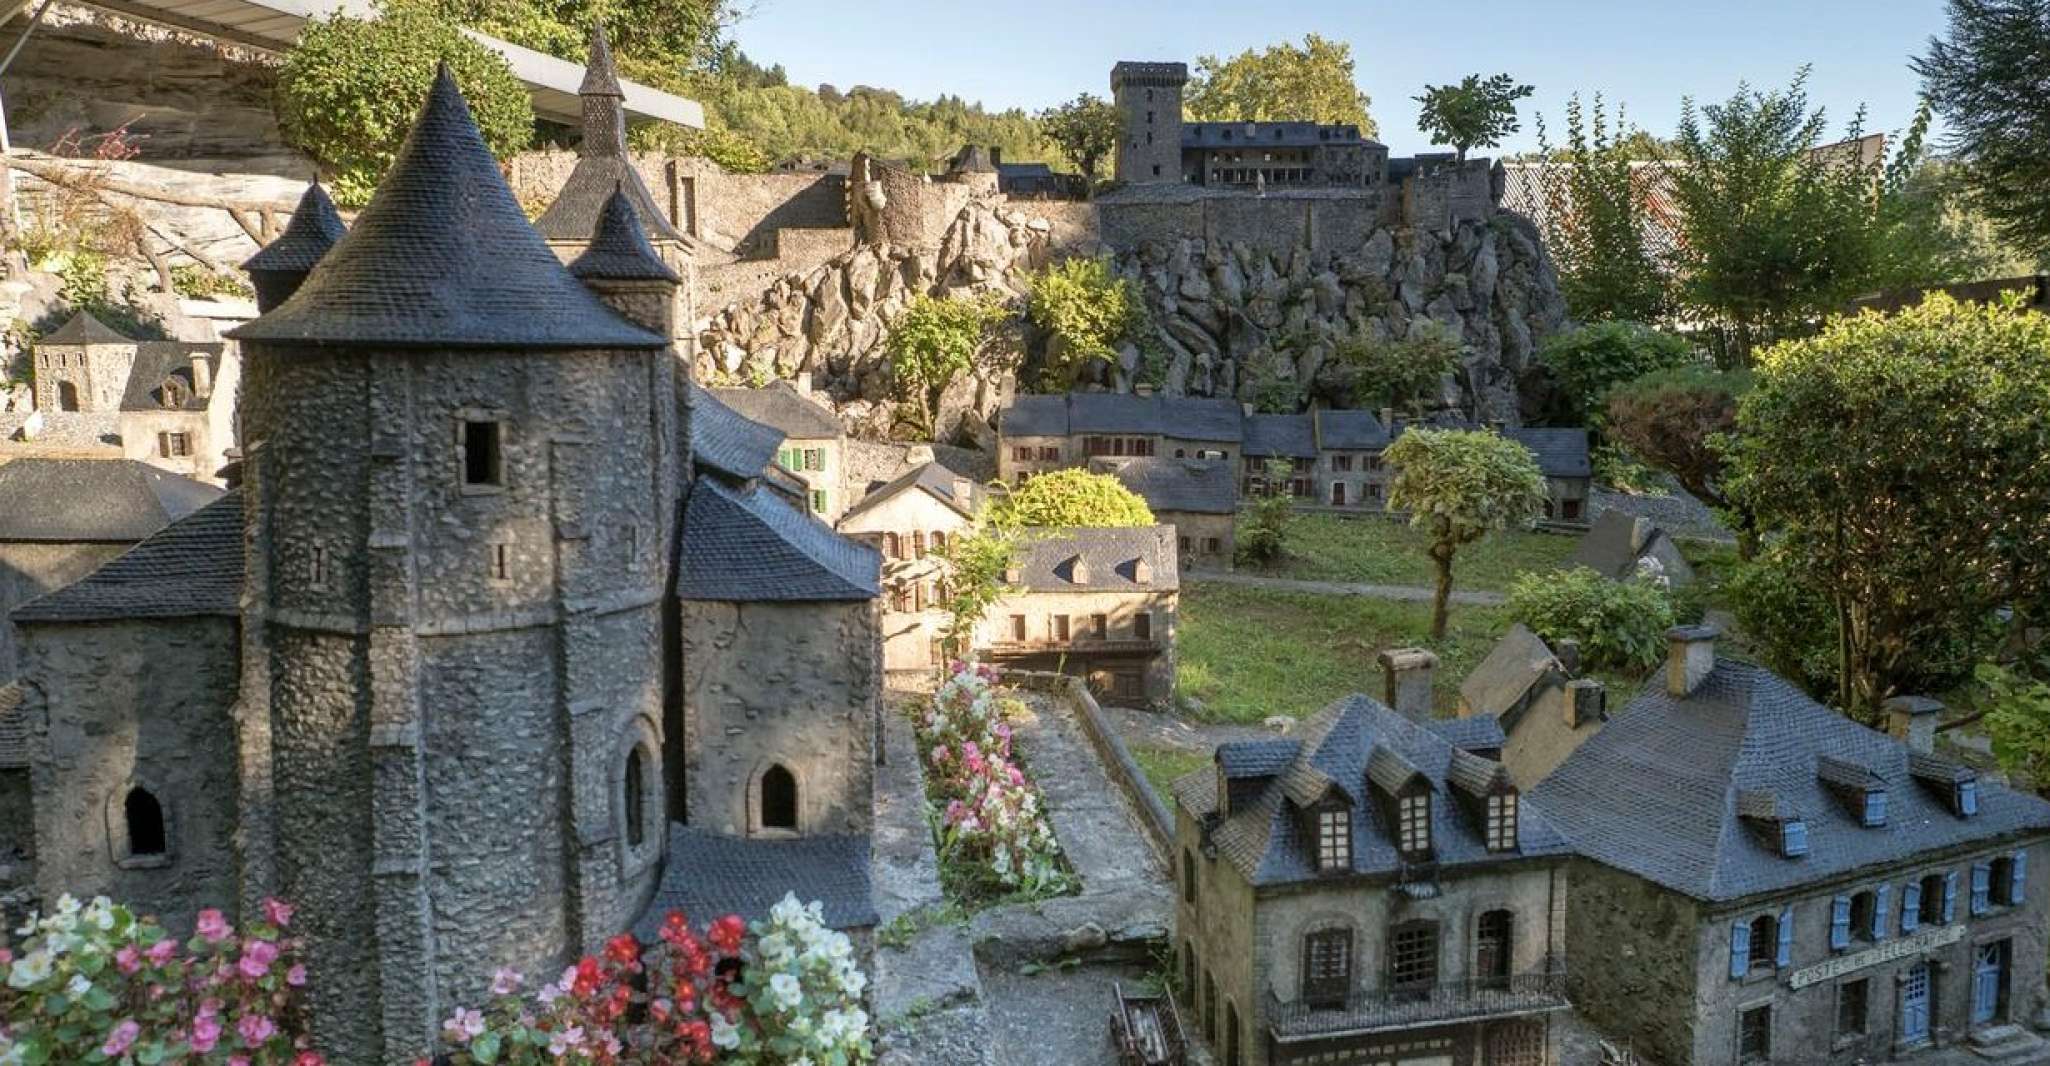 Lourdes Pass, 2 Museums to Visit and the Little Train - Housity